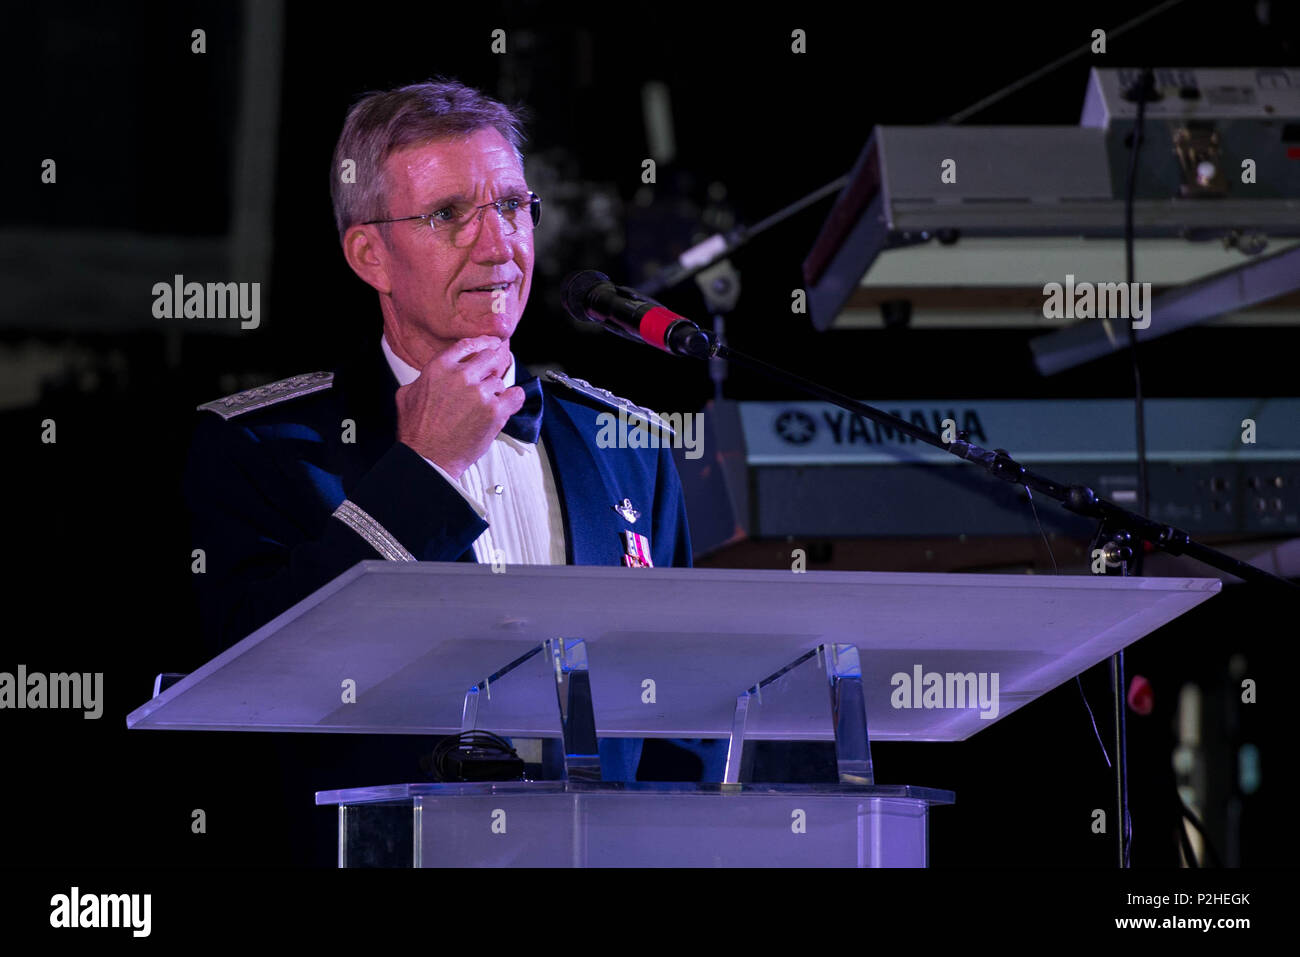 U.S. Air Force Gen. Hawk Carlisle, Air Combat Command commander, speaks during the 100-year Gala celebration at the Hampton Roads Convention Center in Hampton, Va., Sept. 17, 2016. Carlisle discussed the history of Langley Field and the conditions the men faced who started construction in 1916. (U.S. Air Force photo by Airman 1st Class Derrick Seifert) Stock Photo